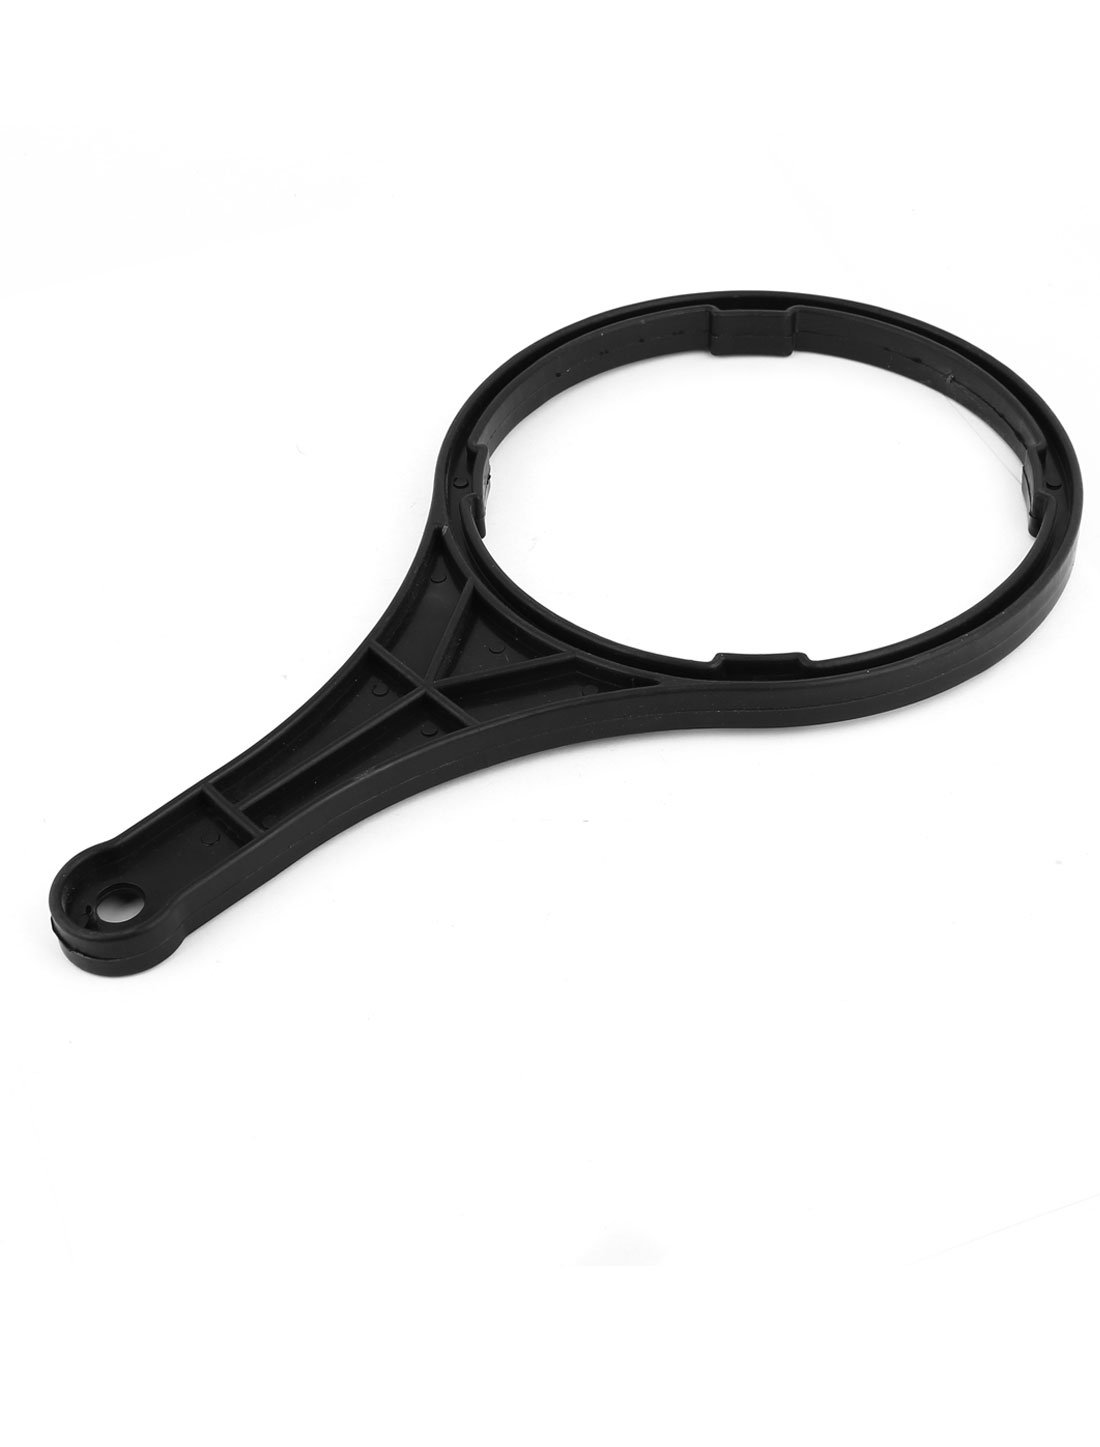 Qtqgoitem Plastic Canister Filter Housing Wrench 6 Inch Hole Dia Black (Model: 77a 68a 929 78b 67f)